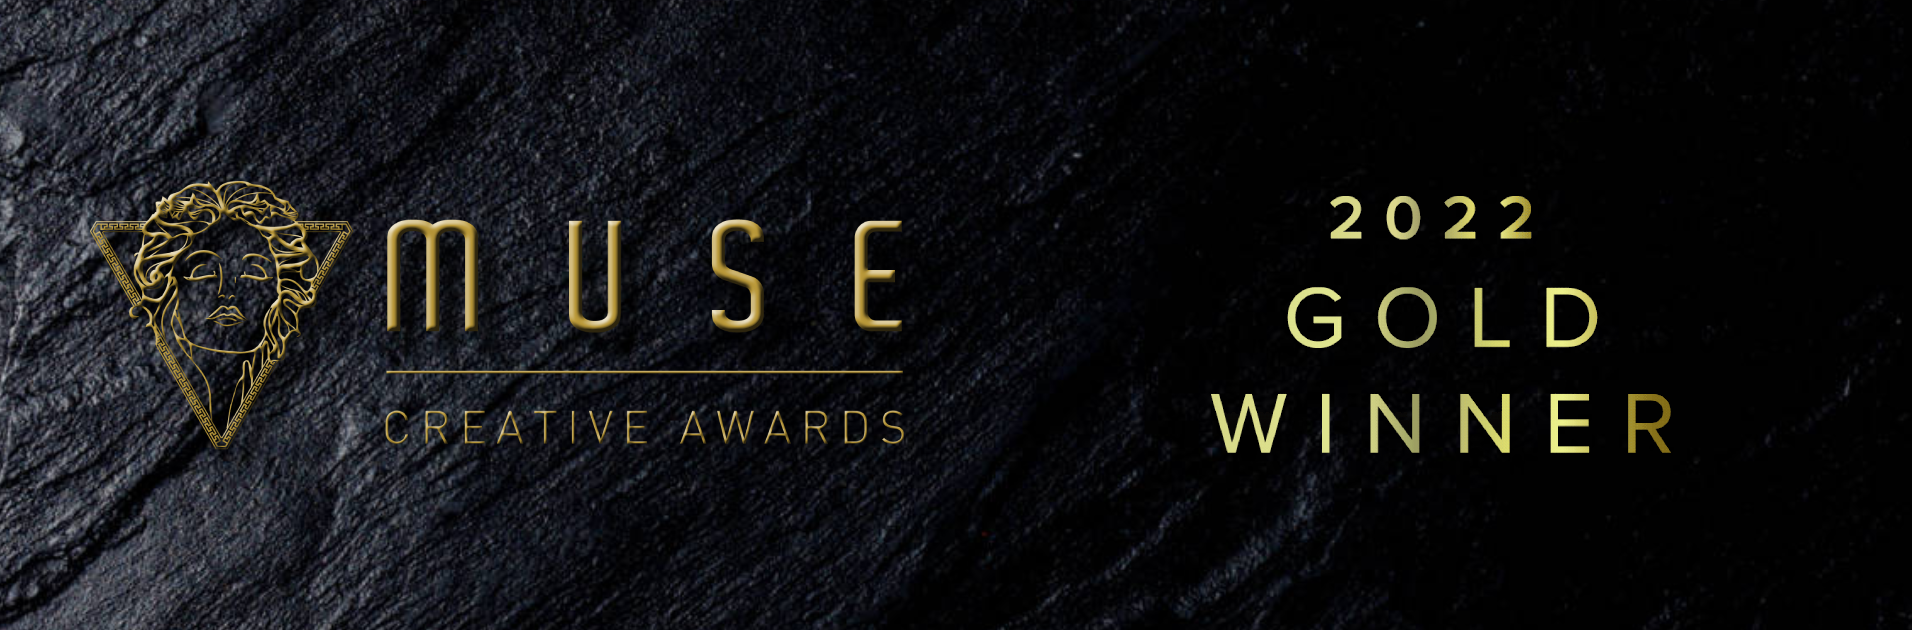 Vicarious PR Takes the Win in the 2022 MUSE Creative Awards